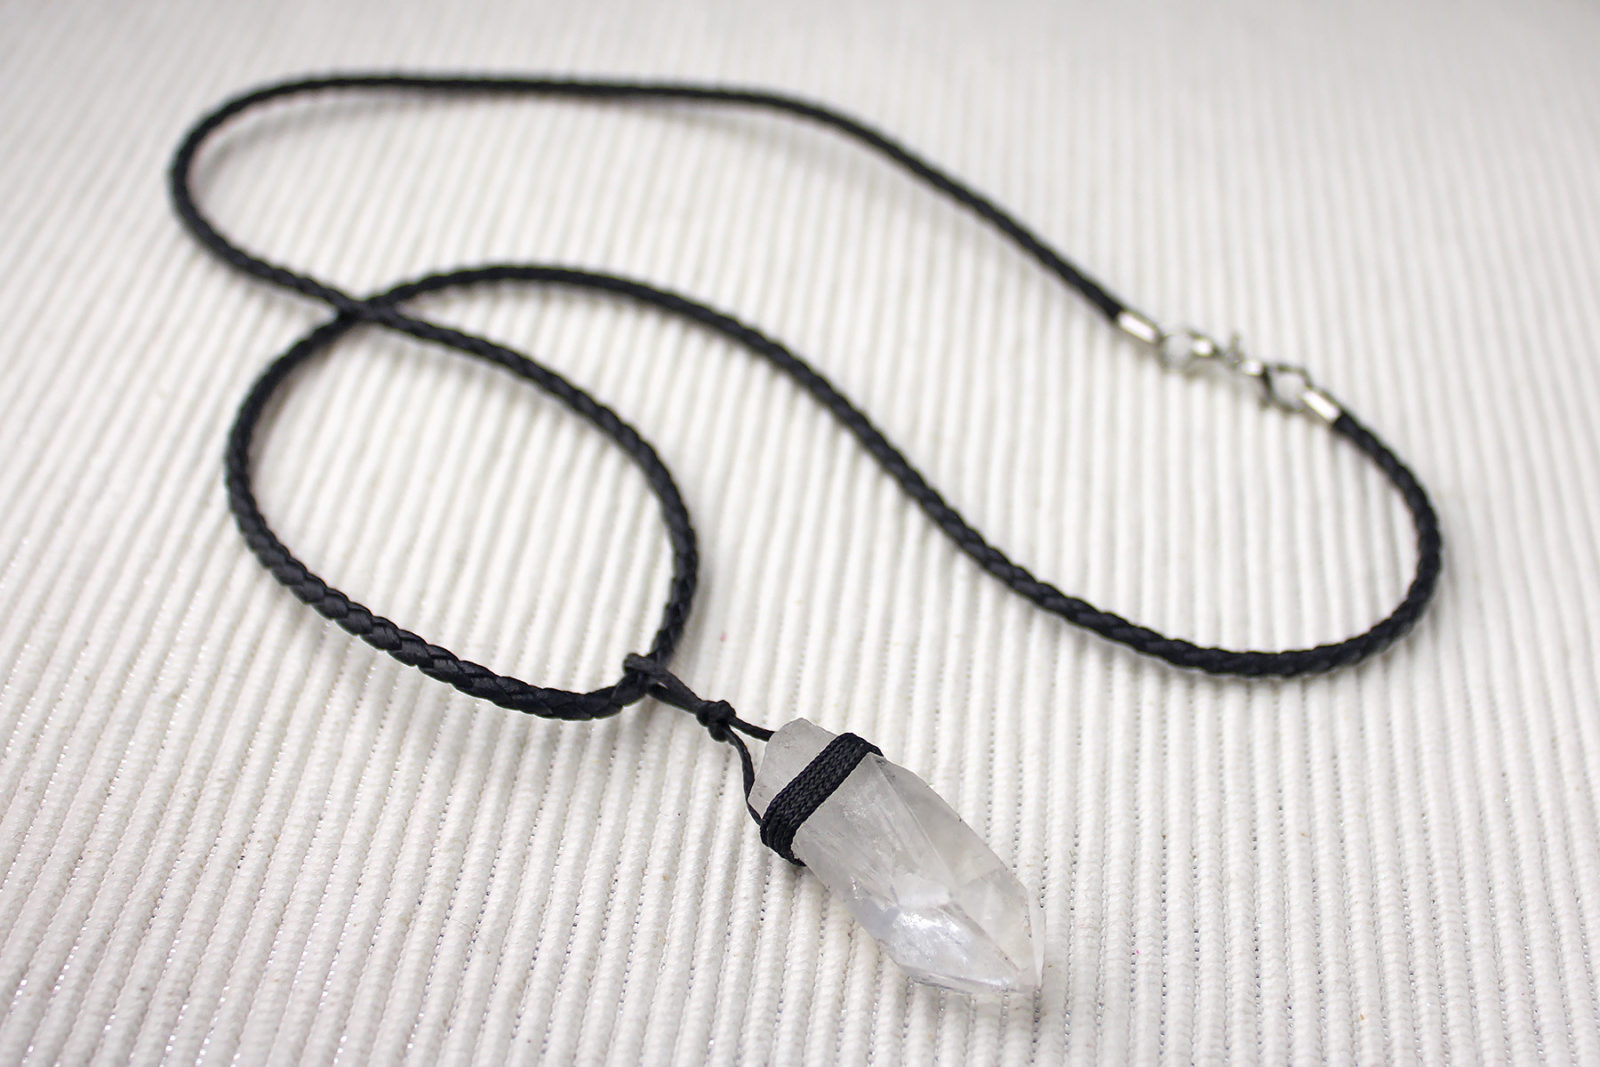 DIY – Rogue One Kyber crystal necklace